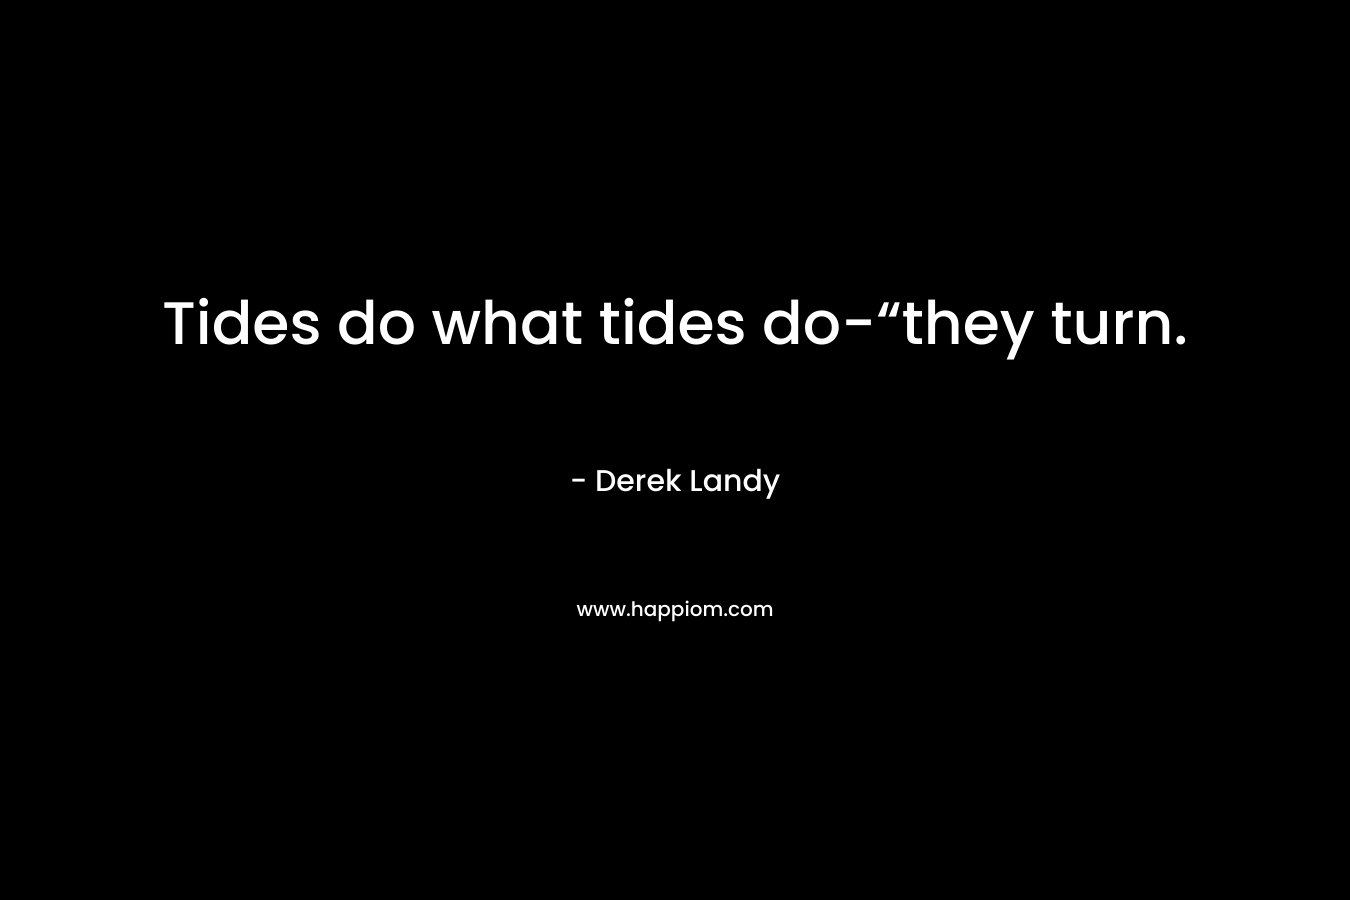 Tides do what tides do-“they turn.